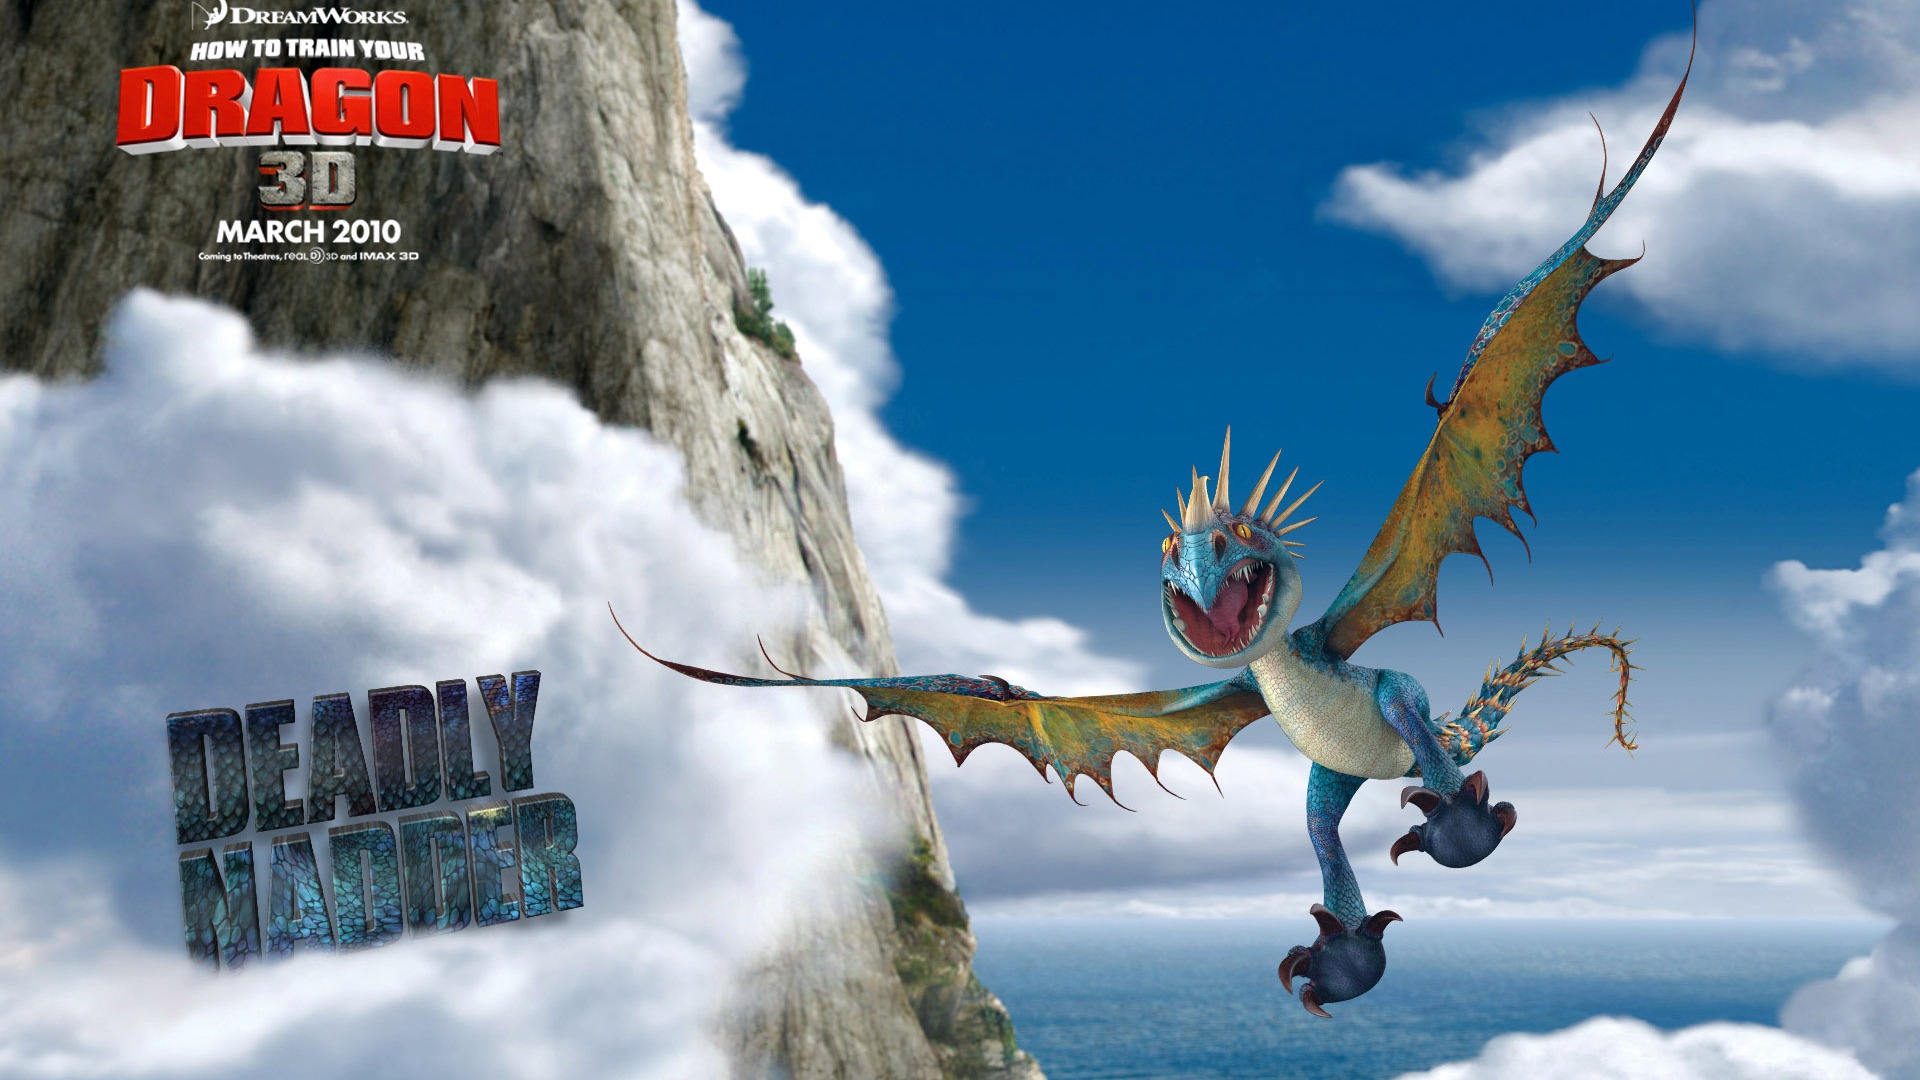 How to Train Your Dragon HD wallpaper #8 - 1920x1080